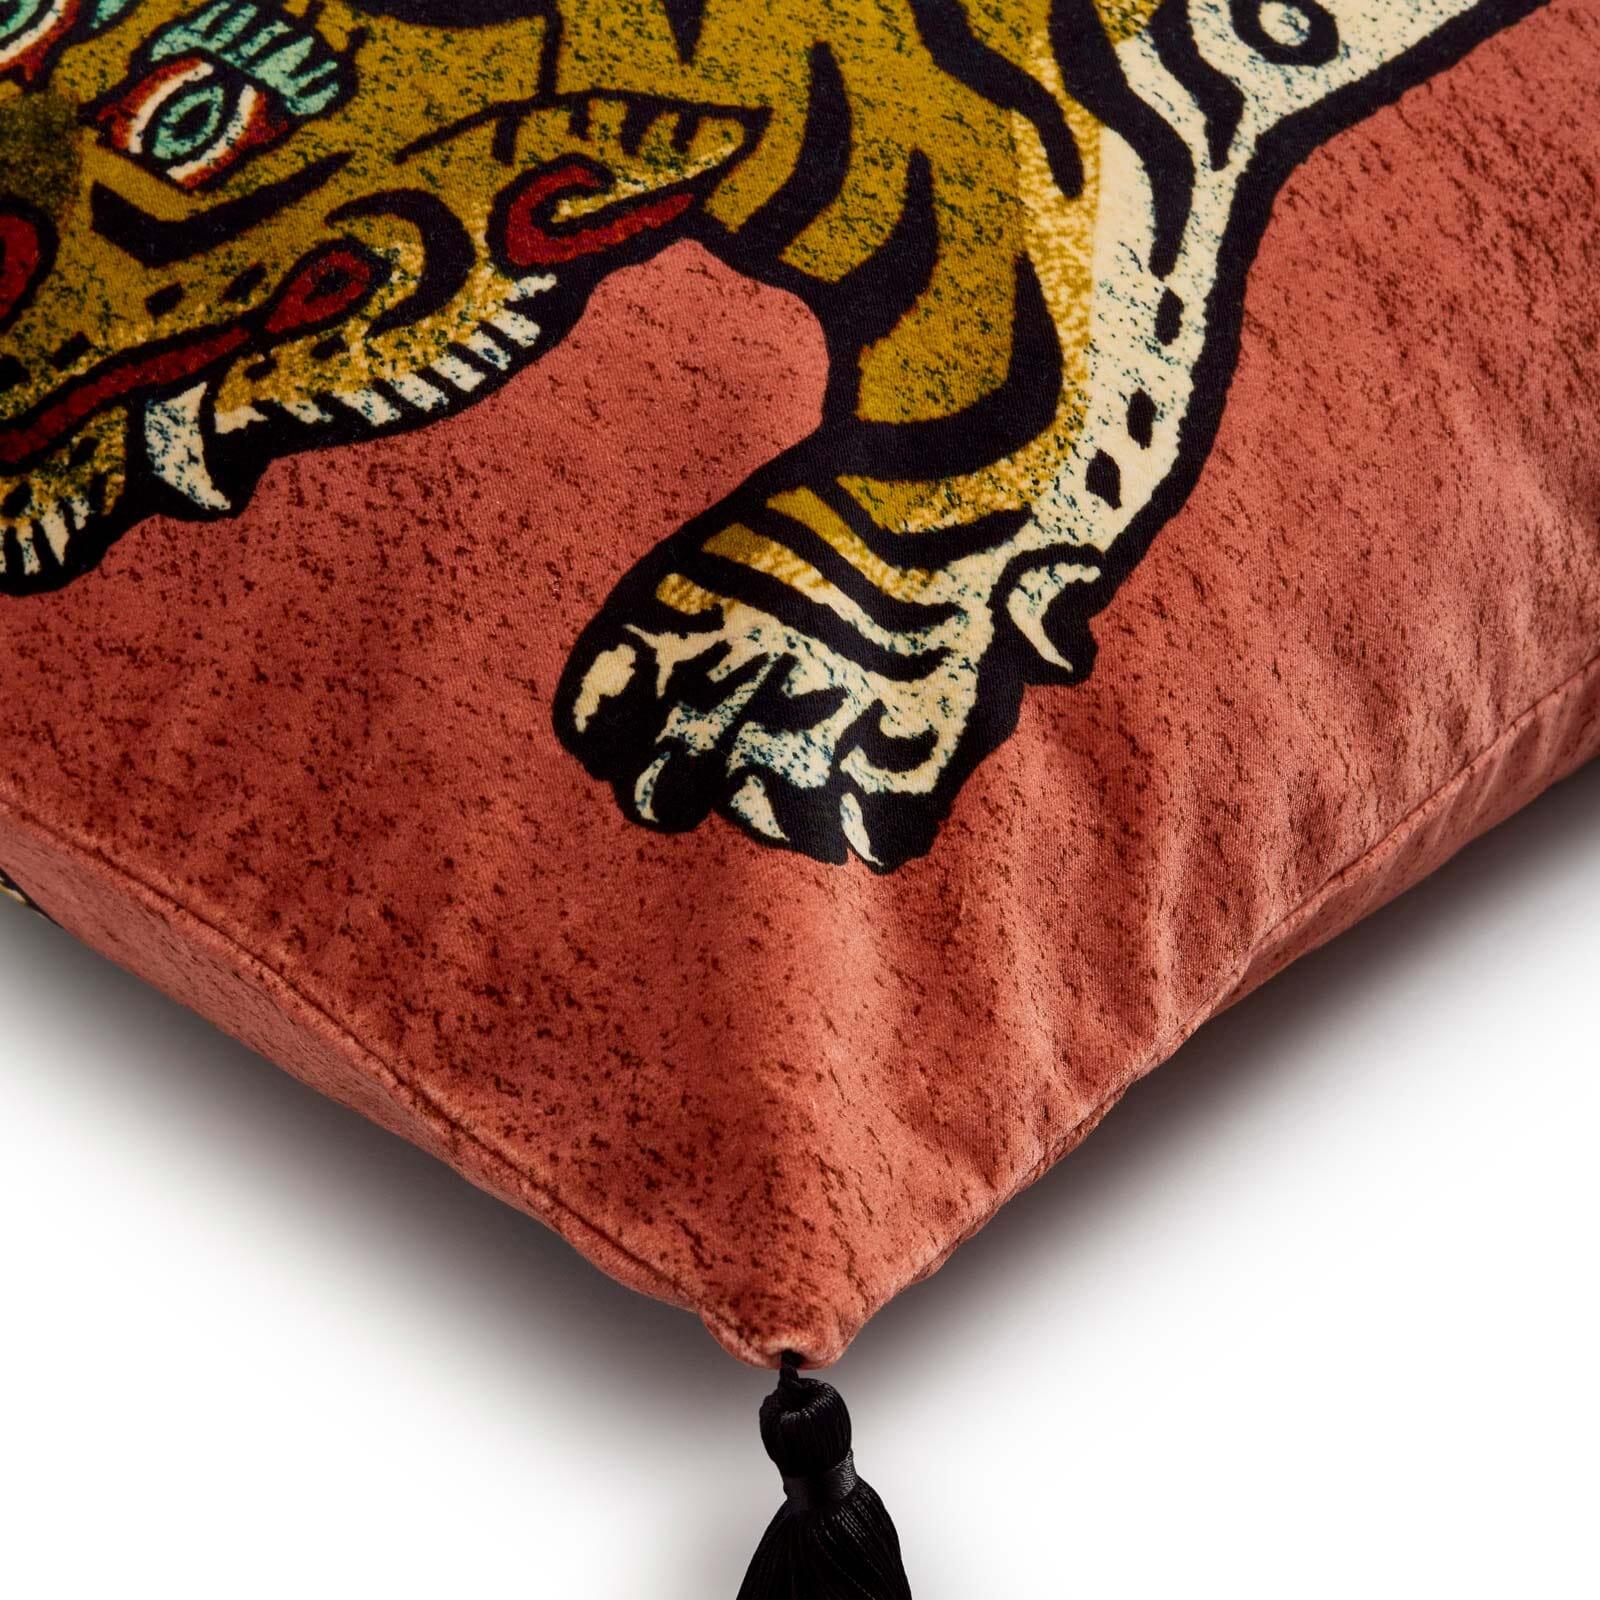 Work the big cat of the jungle into your interior with this plush velvet cushion. SABER the tiger, a Tibetan-inspired motif, pops against a luscious pink background. 

House of Hackney donates a portion of the proceeds from this cushion to Panthera,